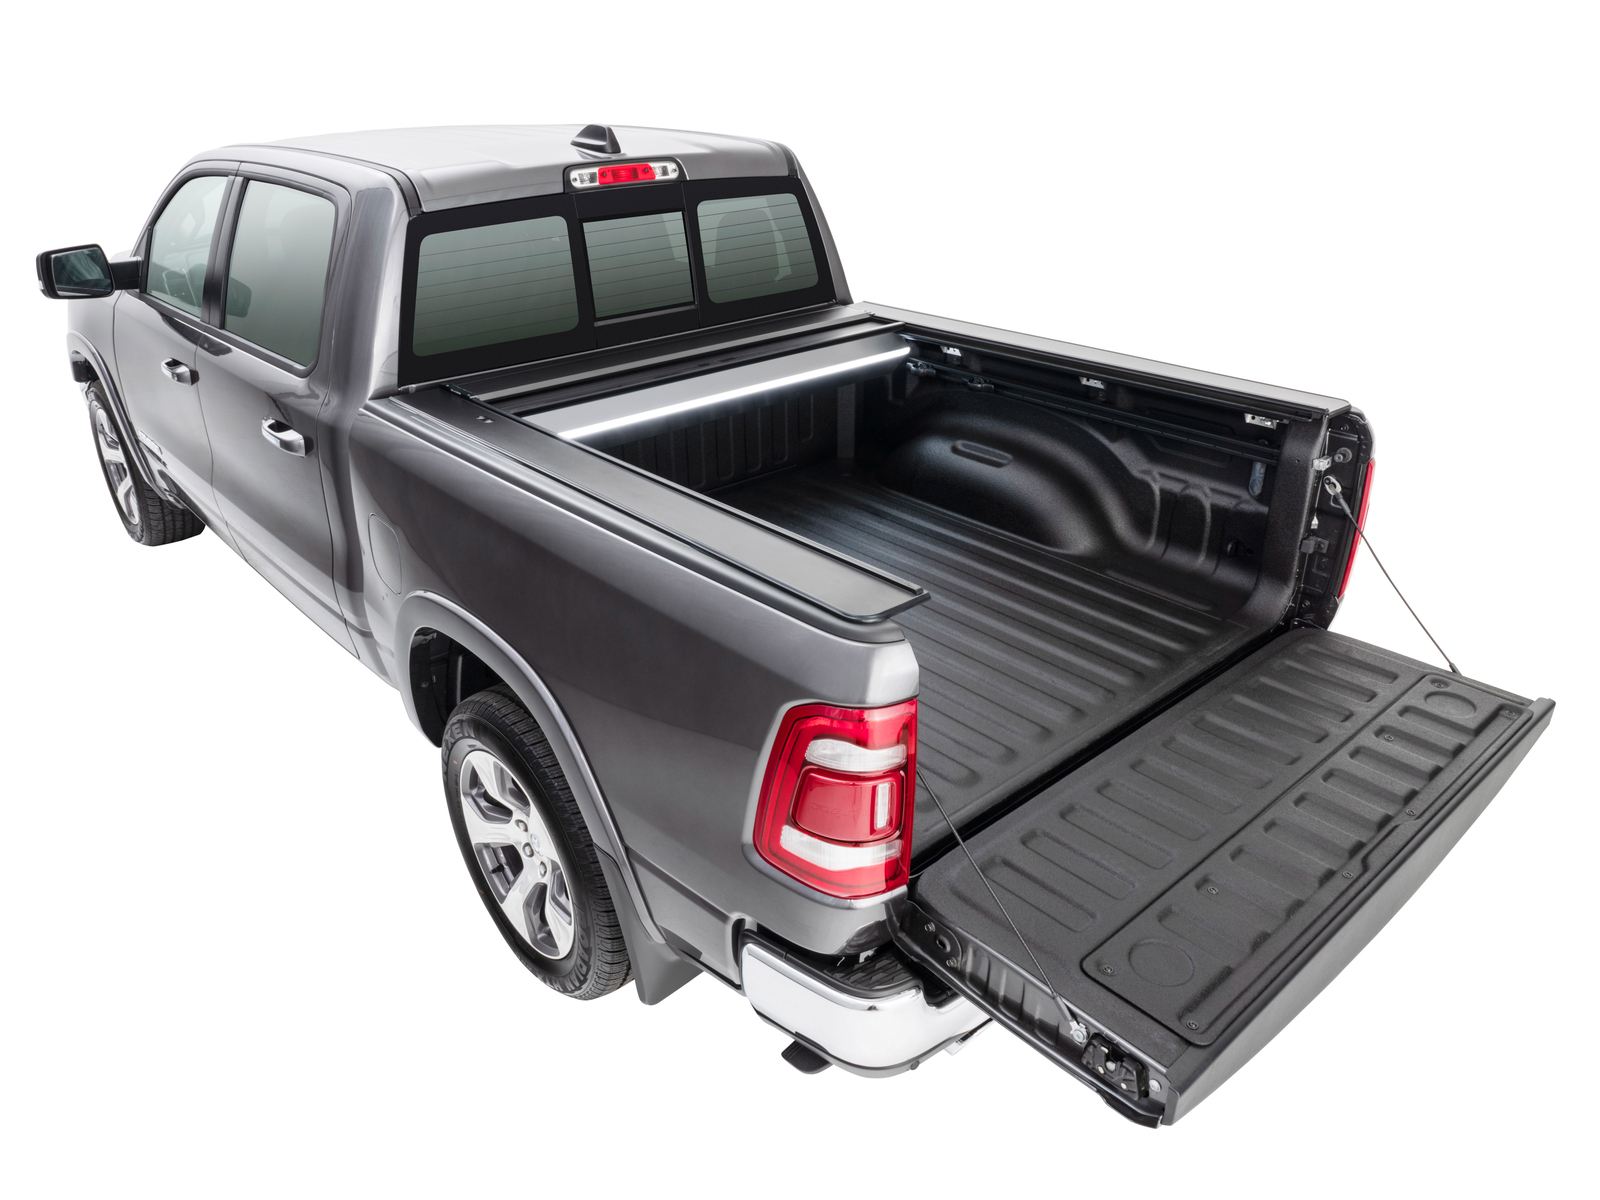 HSP Roll R Cover Series 3 To Suit Ram 1500 DT 2021+ 5’7" Tub 